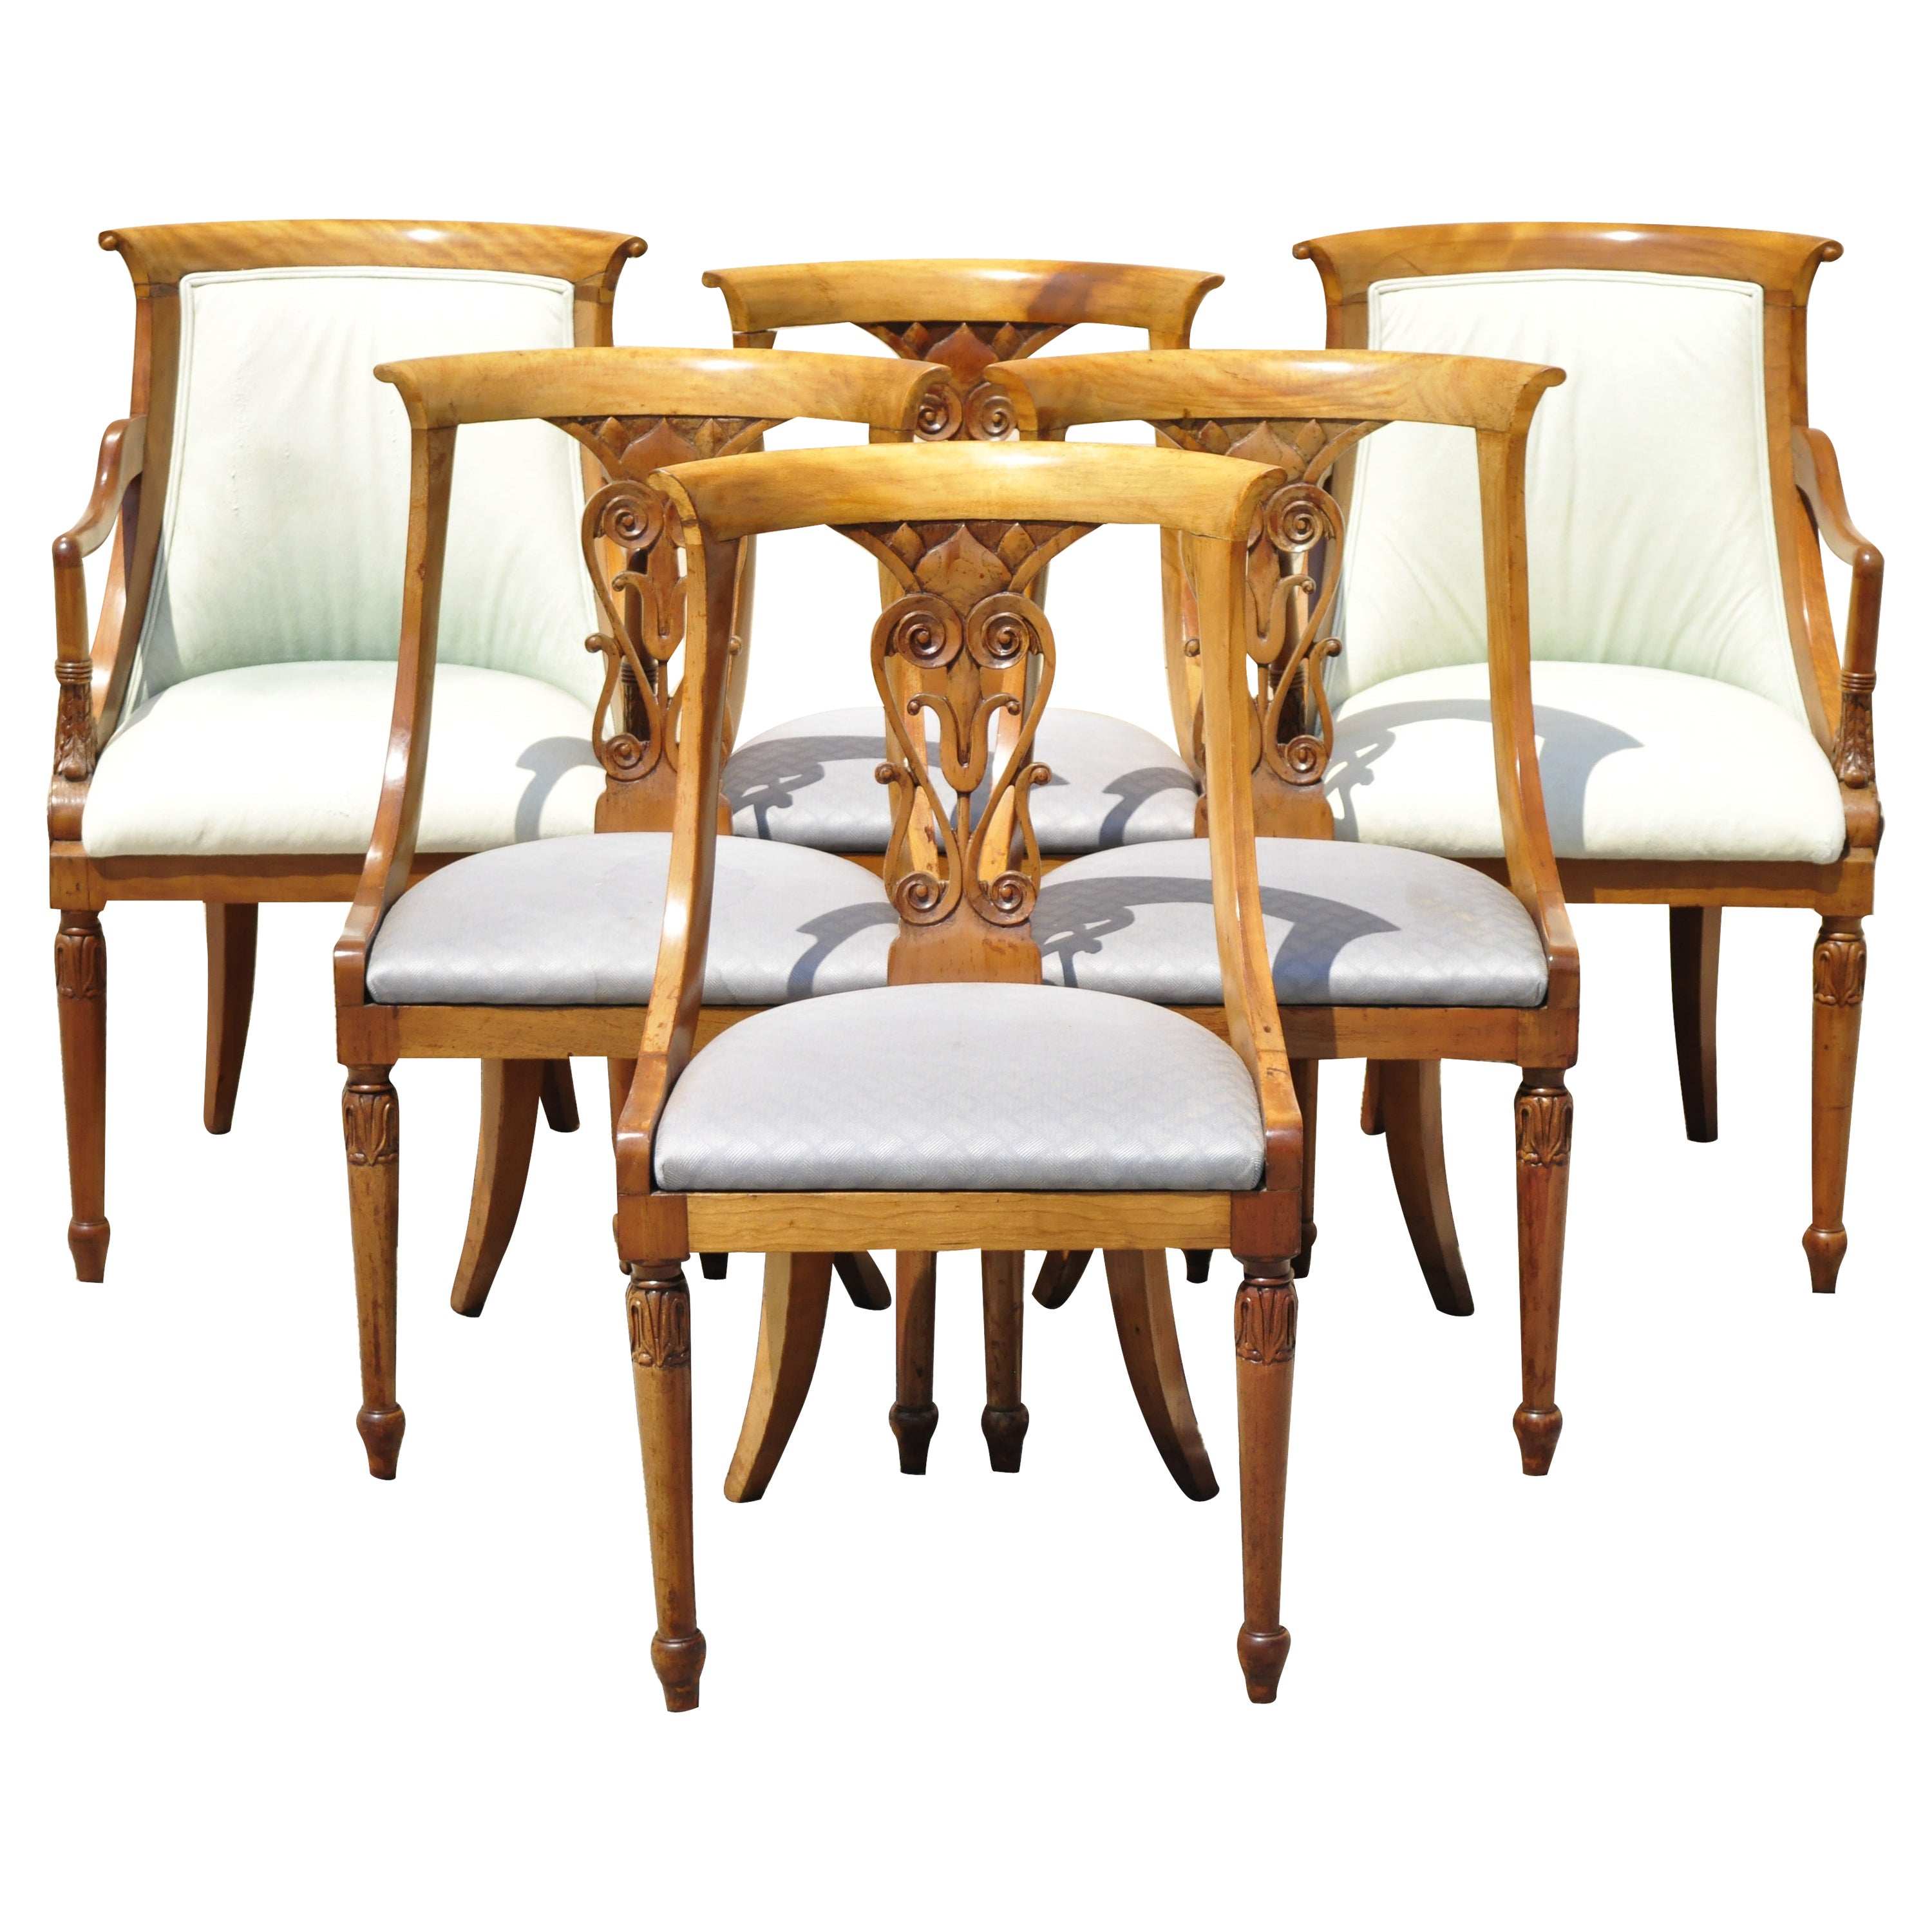 Italian Neoclassical Regency Cherry Wood Saber Leg Dining Chairs - Set of 6 For Sale